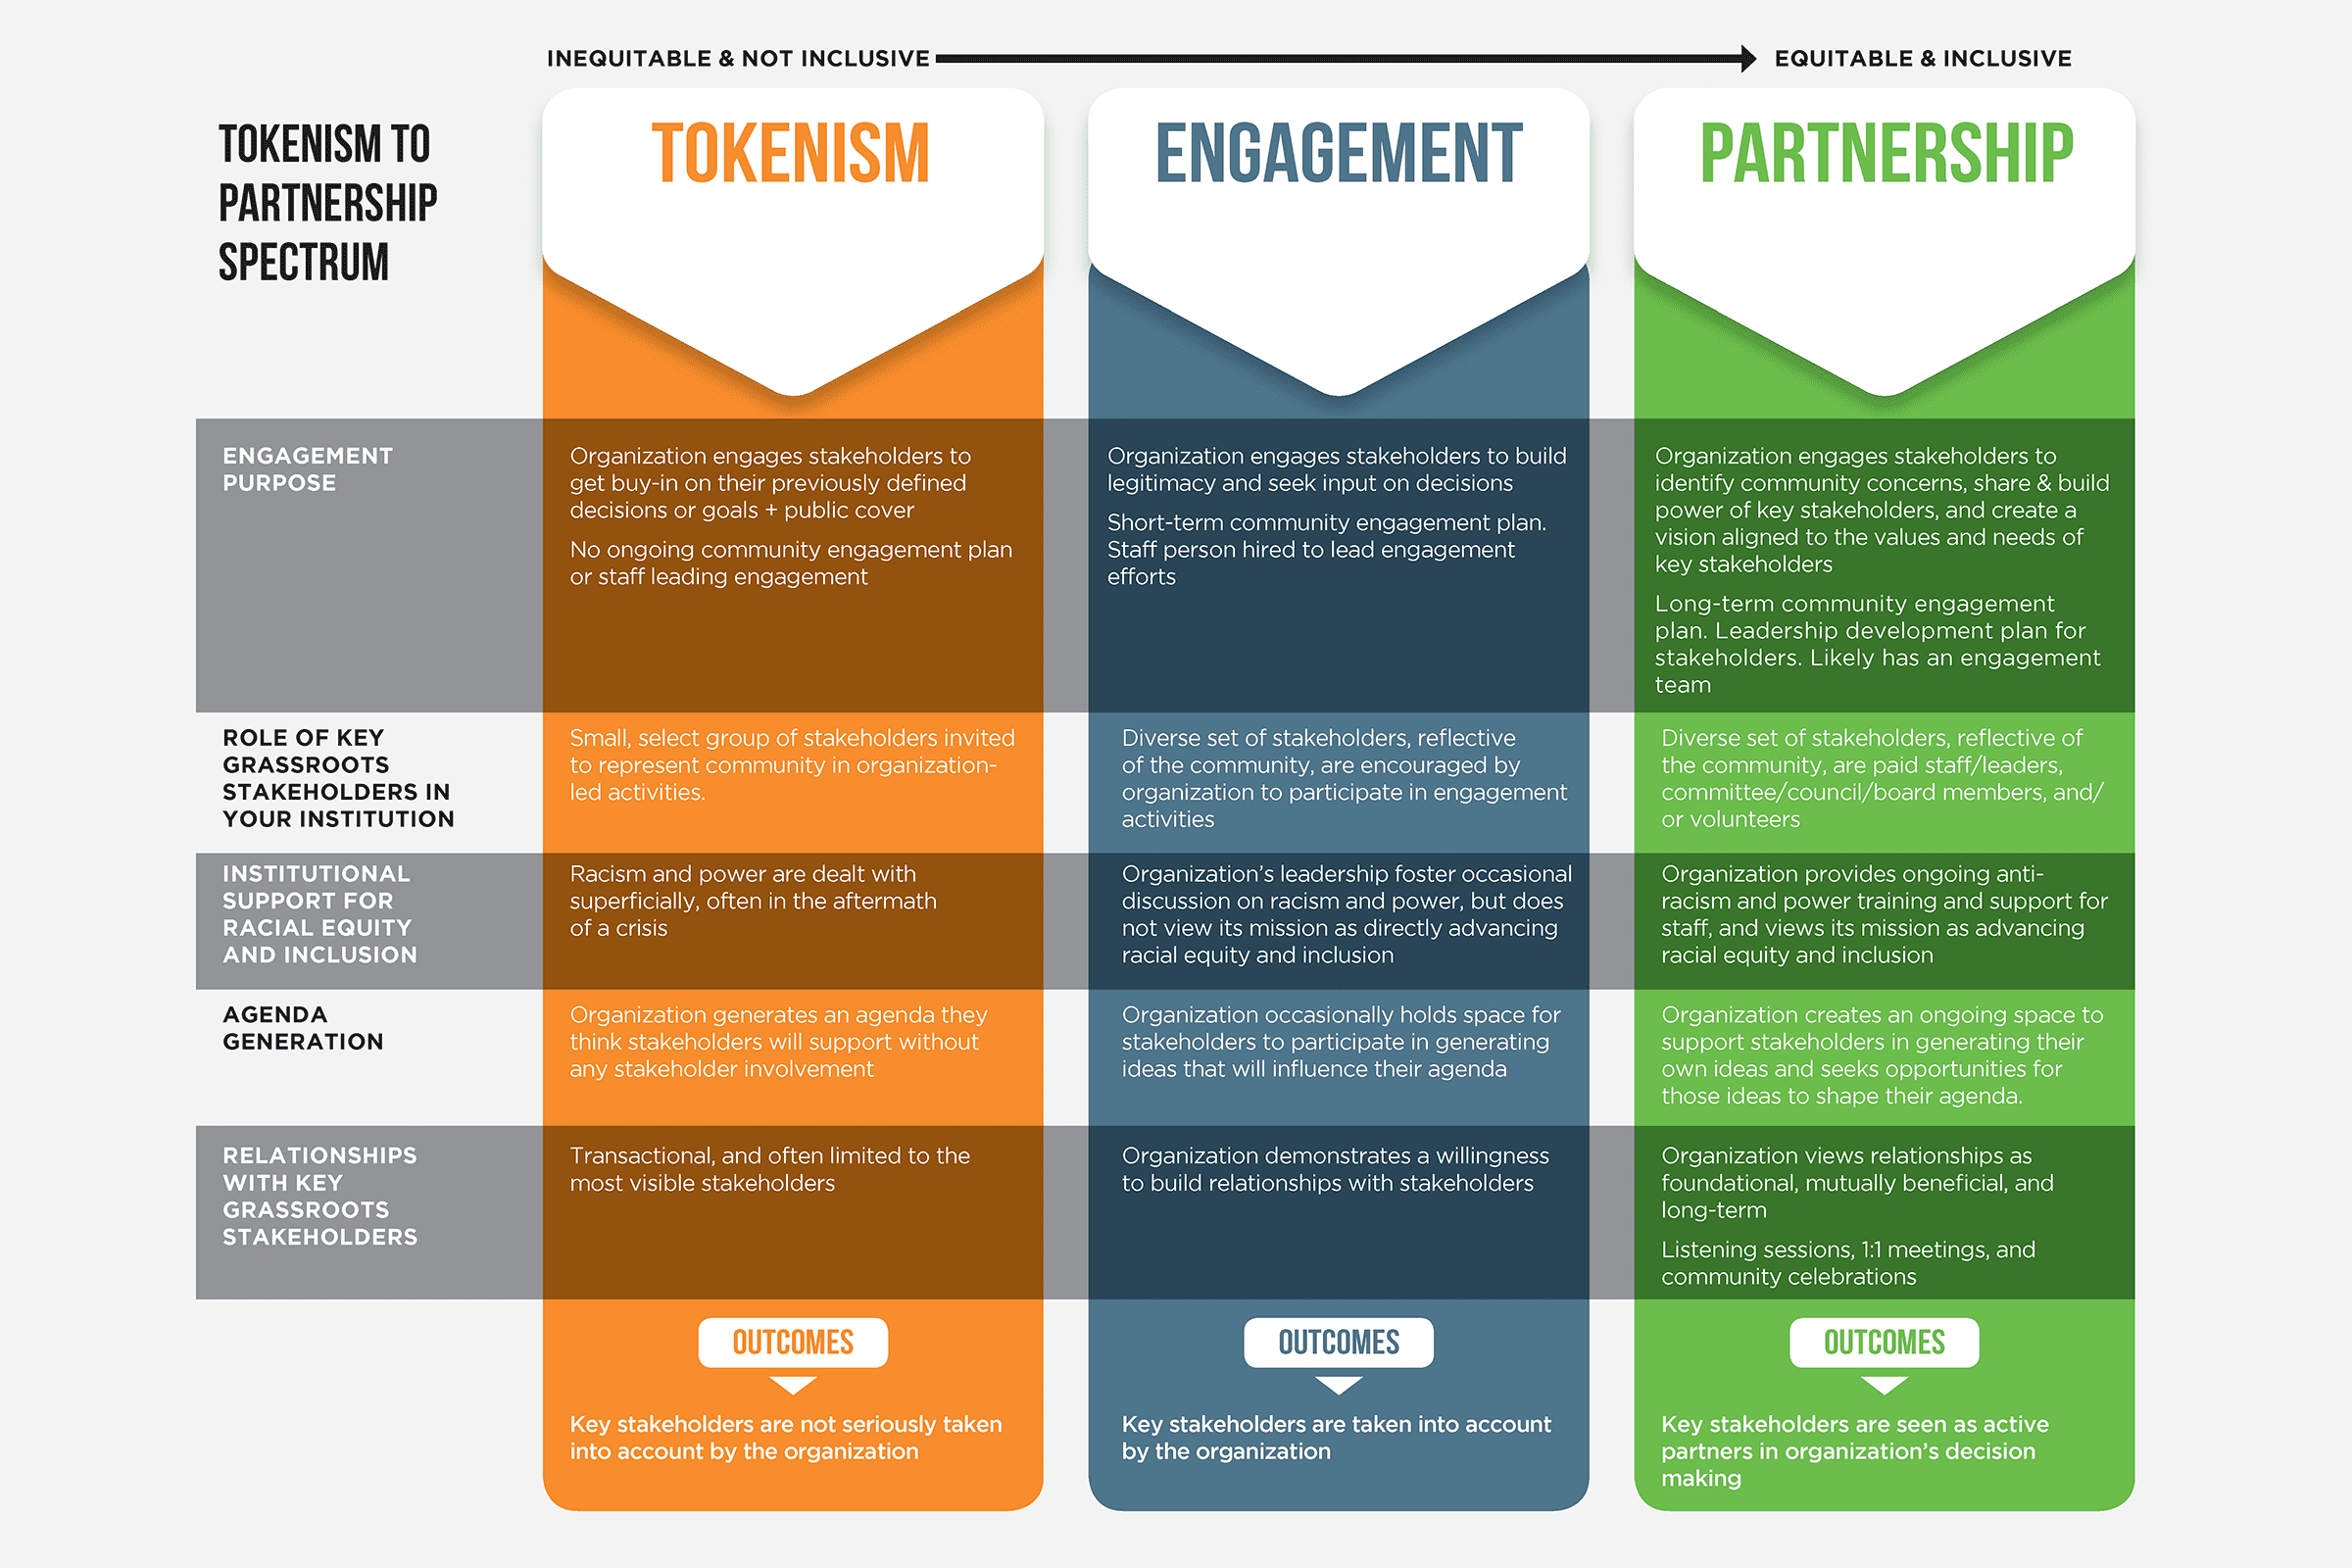 This infographic summarizes how the key features of a stakeholder engagement campaign would be approached in each of three frameworks: Tokenism, Engagement, or Partnership.